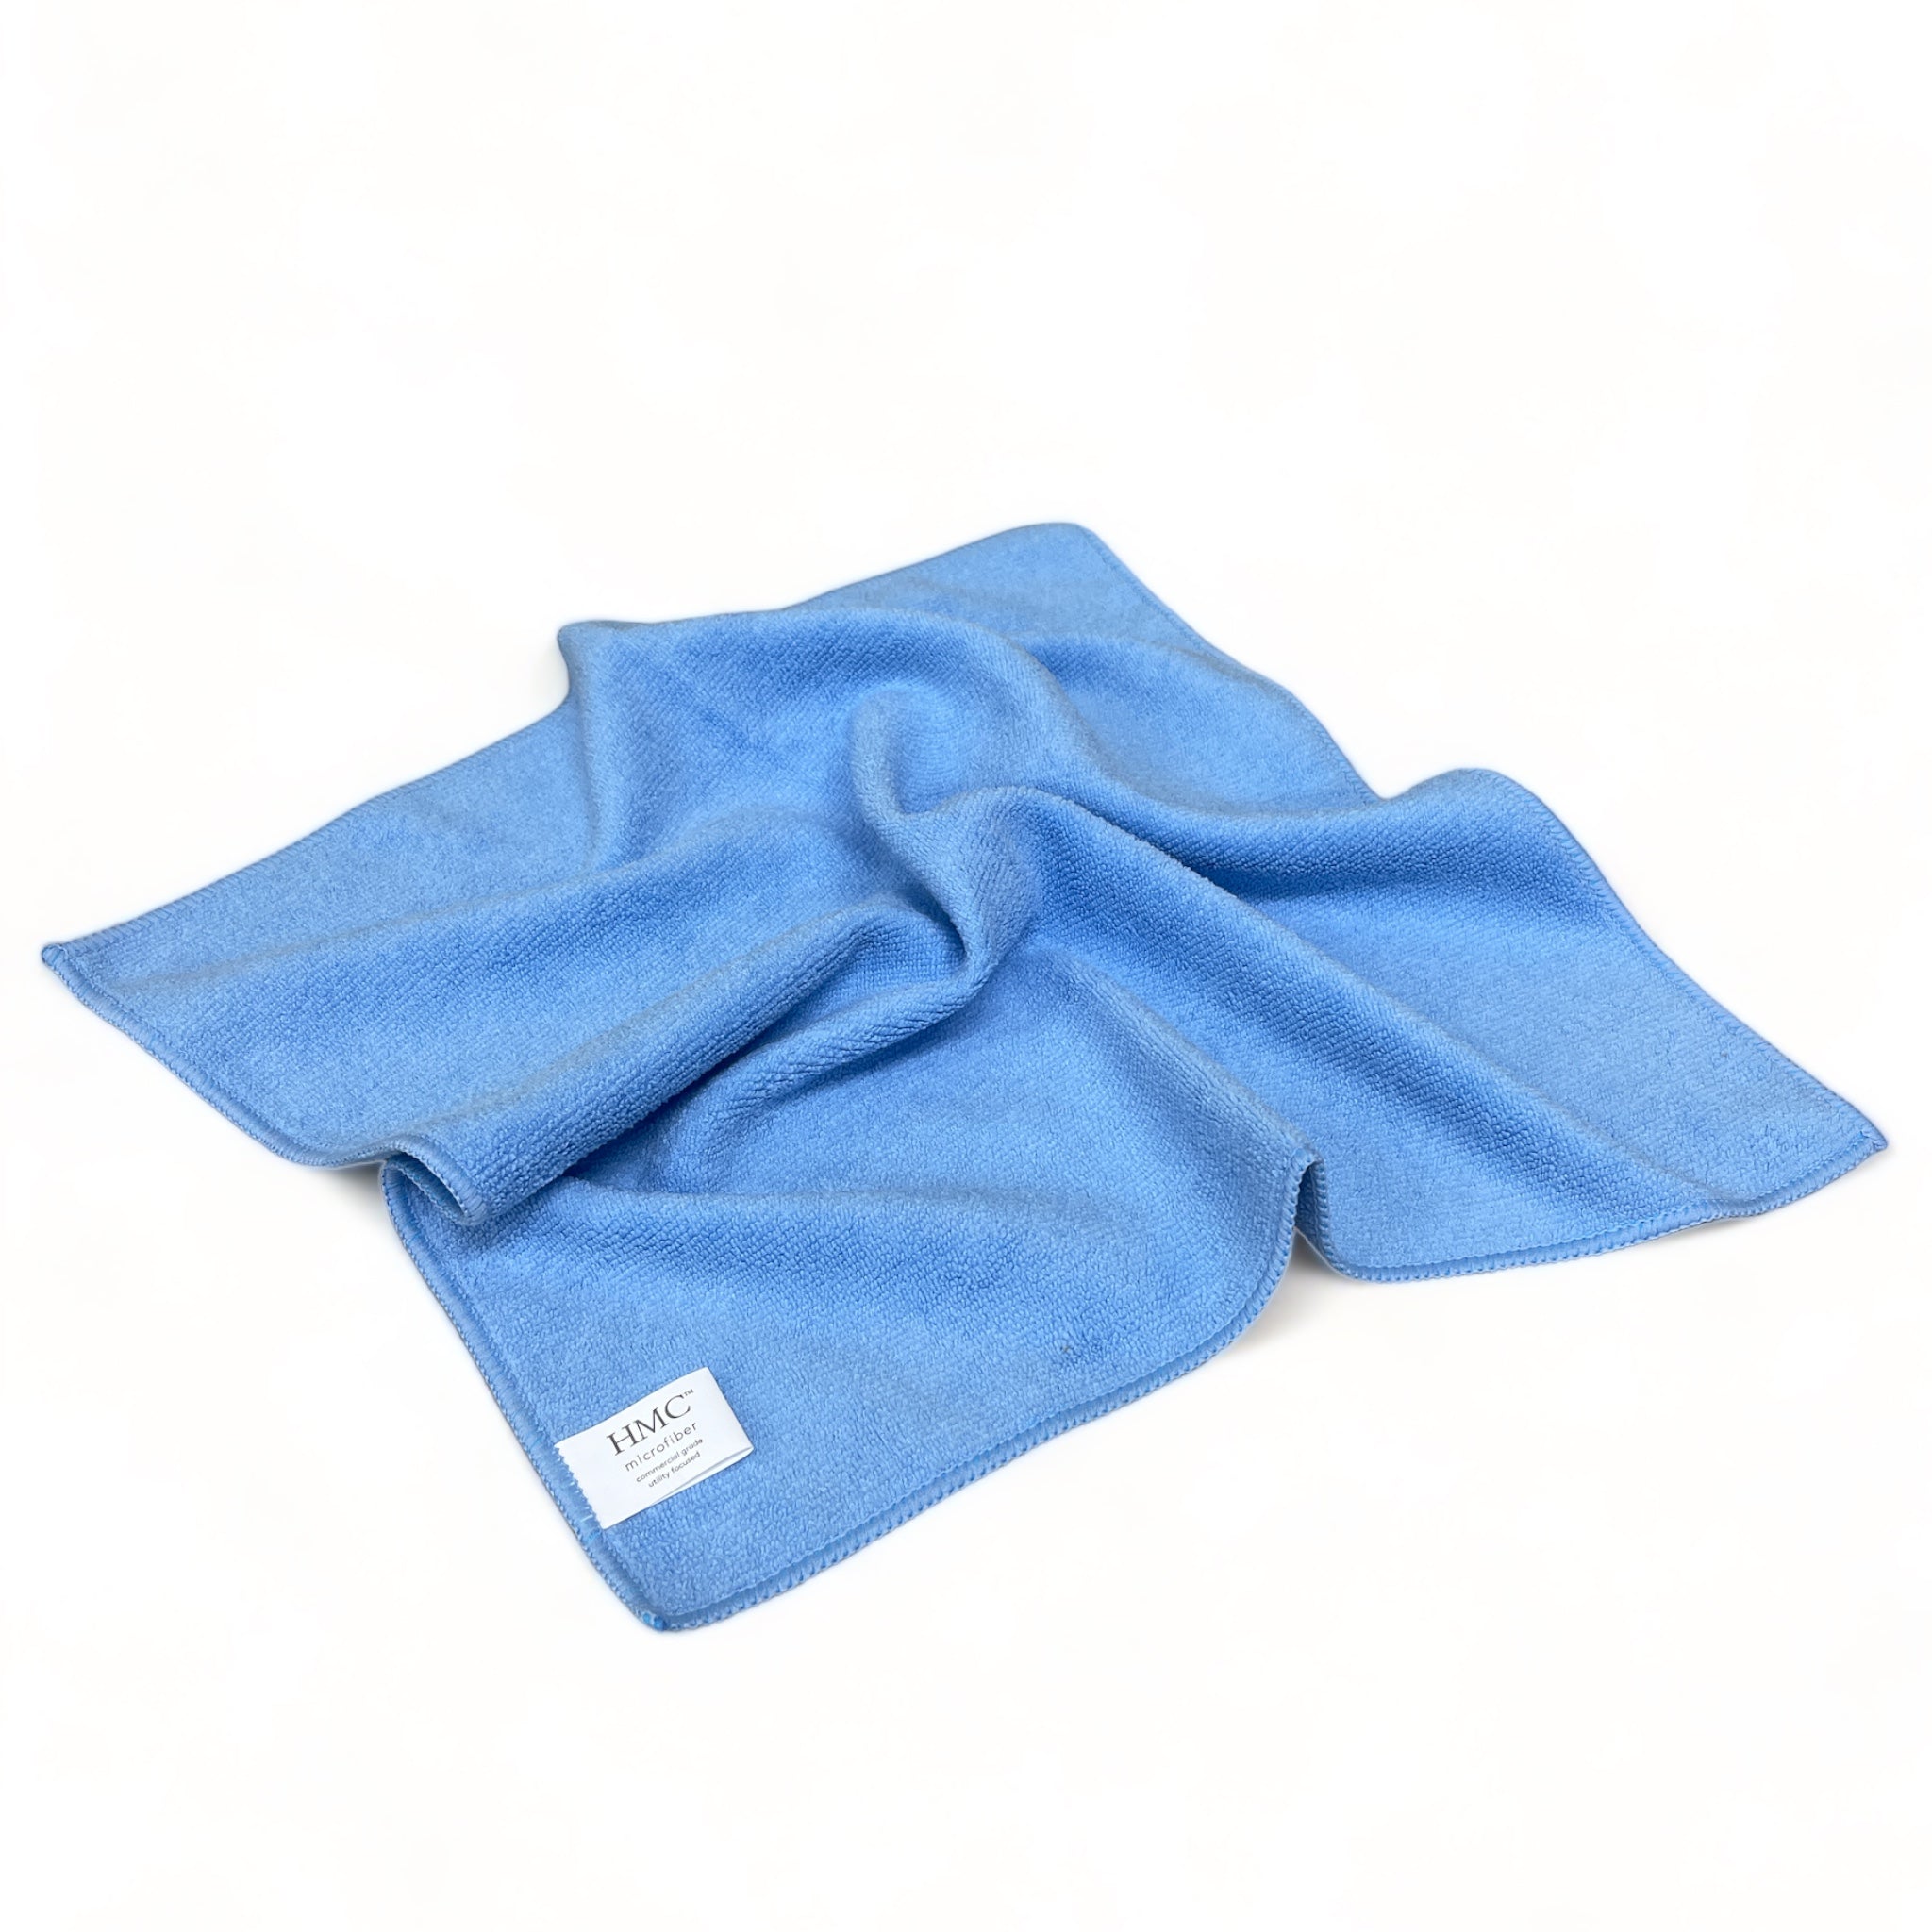 Single blue 16"x16" microfiber towel from the bulk case displayed on white surface